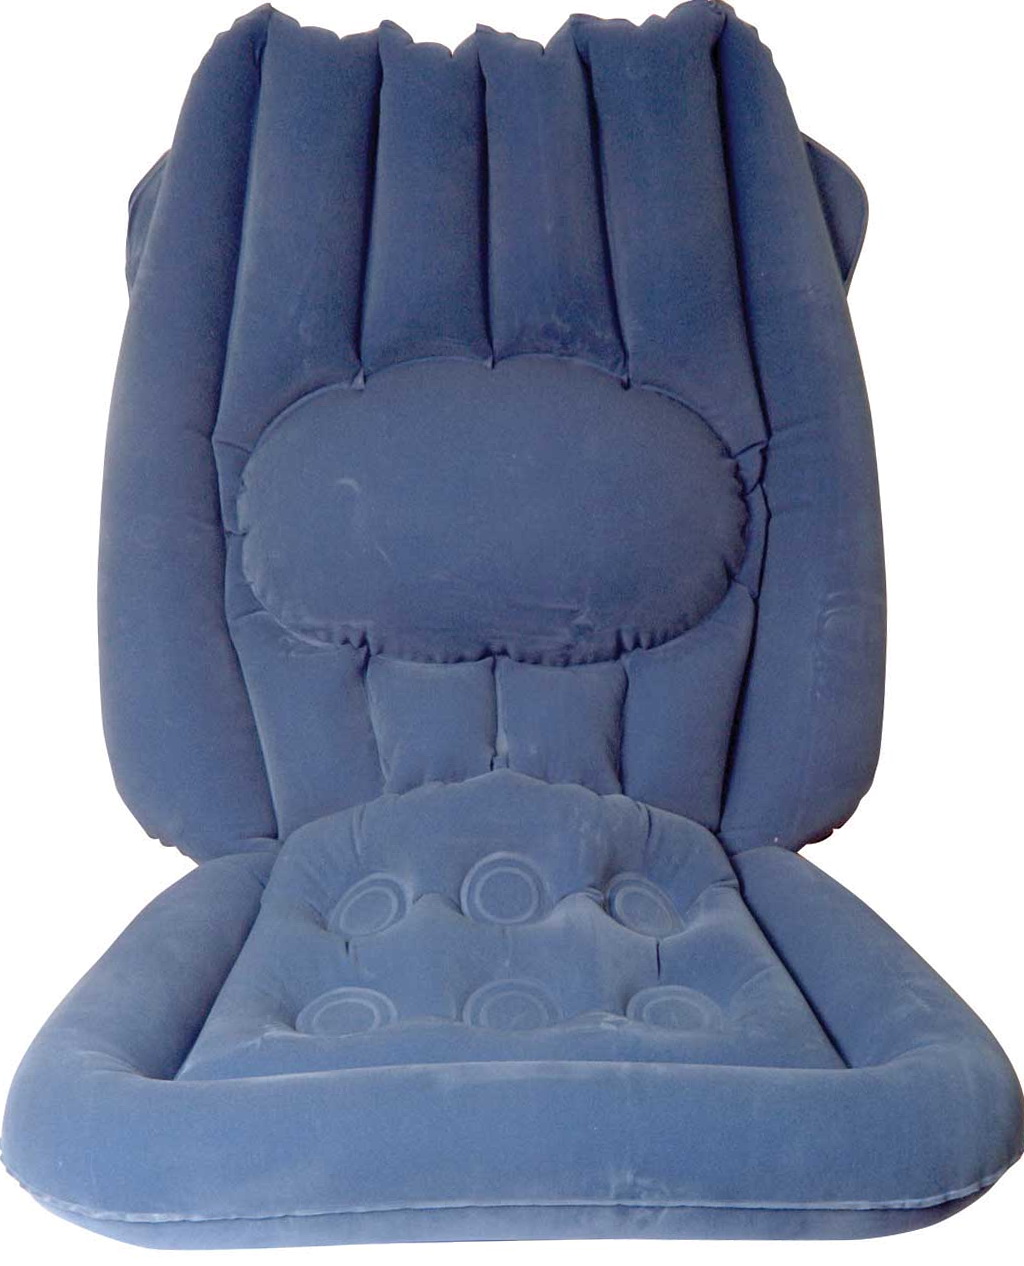 Best Car Seat Cushions For Back Pain | Home Design Ideas